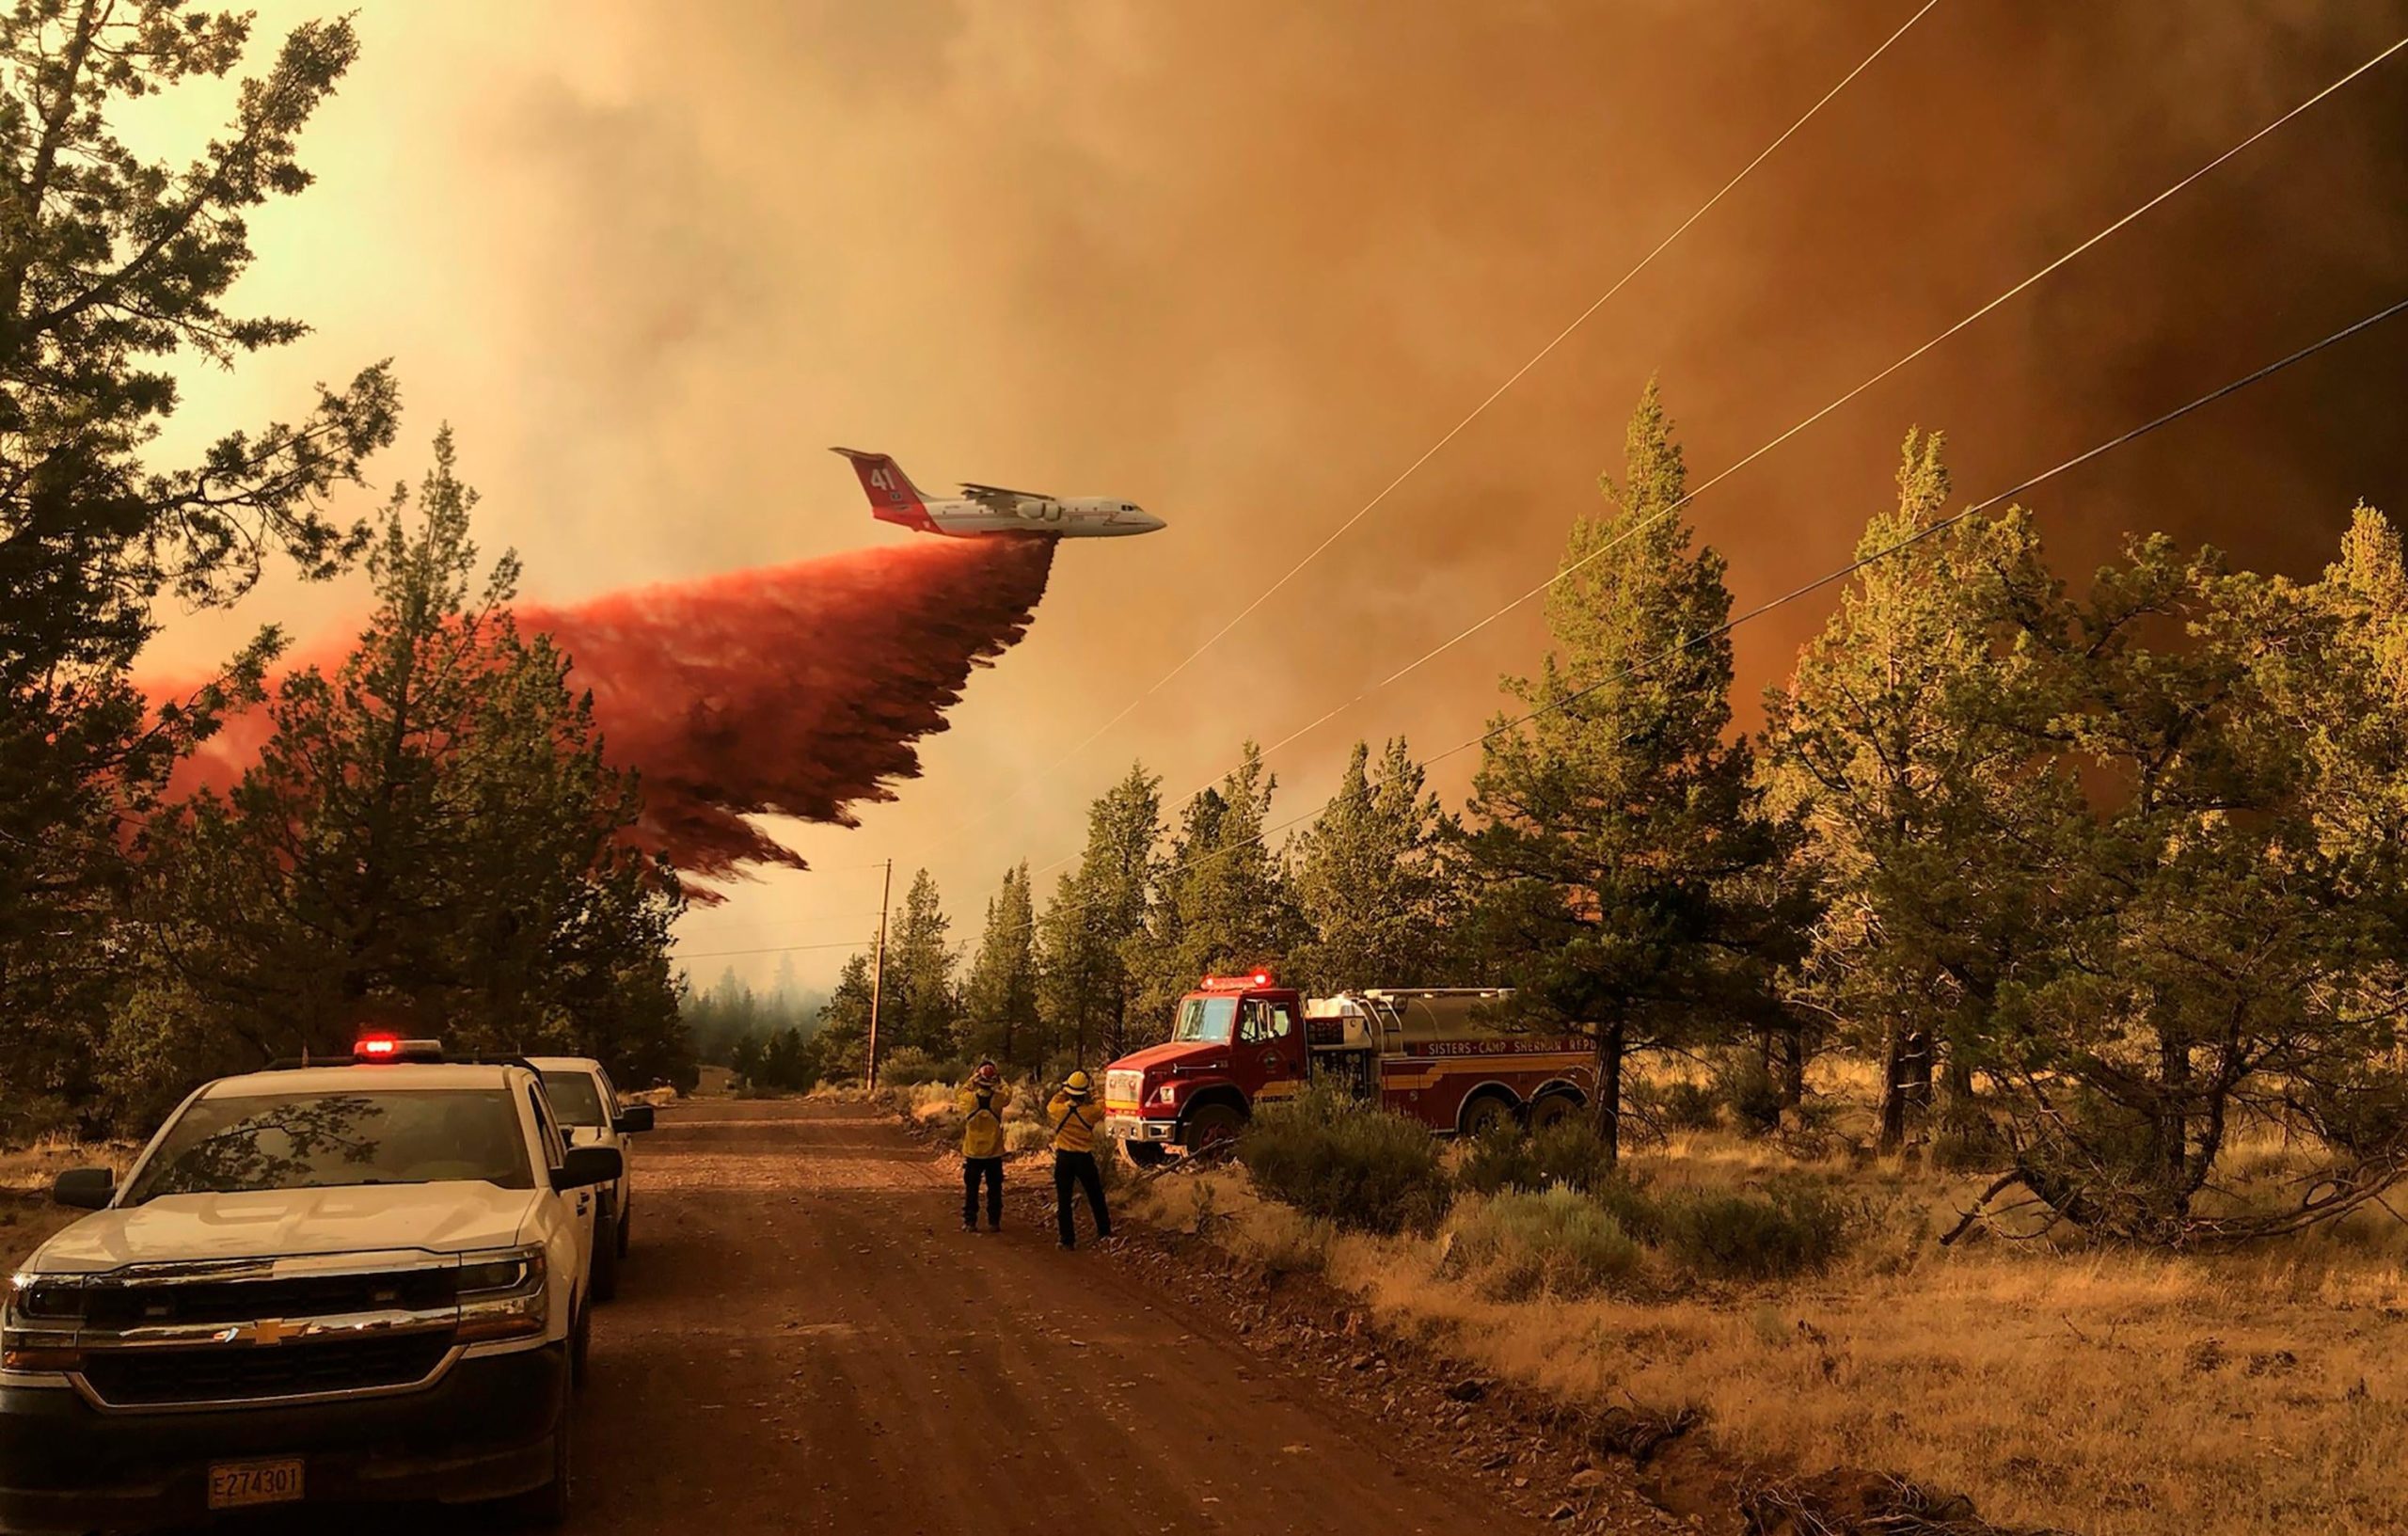 A firefighting tanker making a retardant drop over the Grandview Fire near Sisters, Oregon. (Photo: Oregon Department of Forestry via AP, AP)